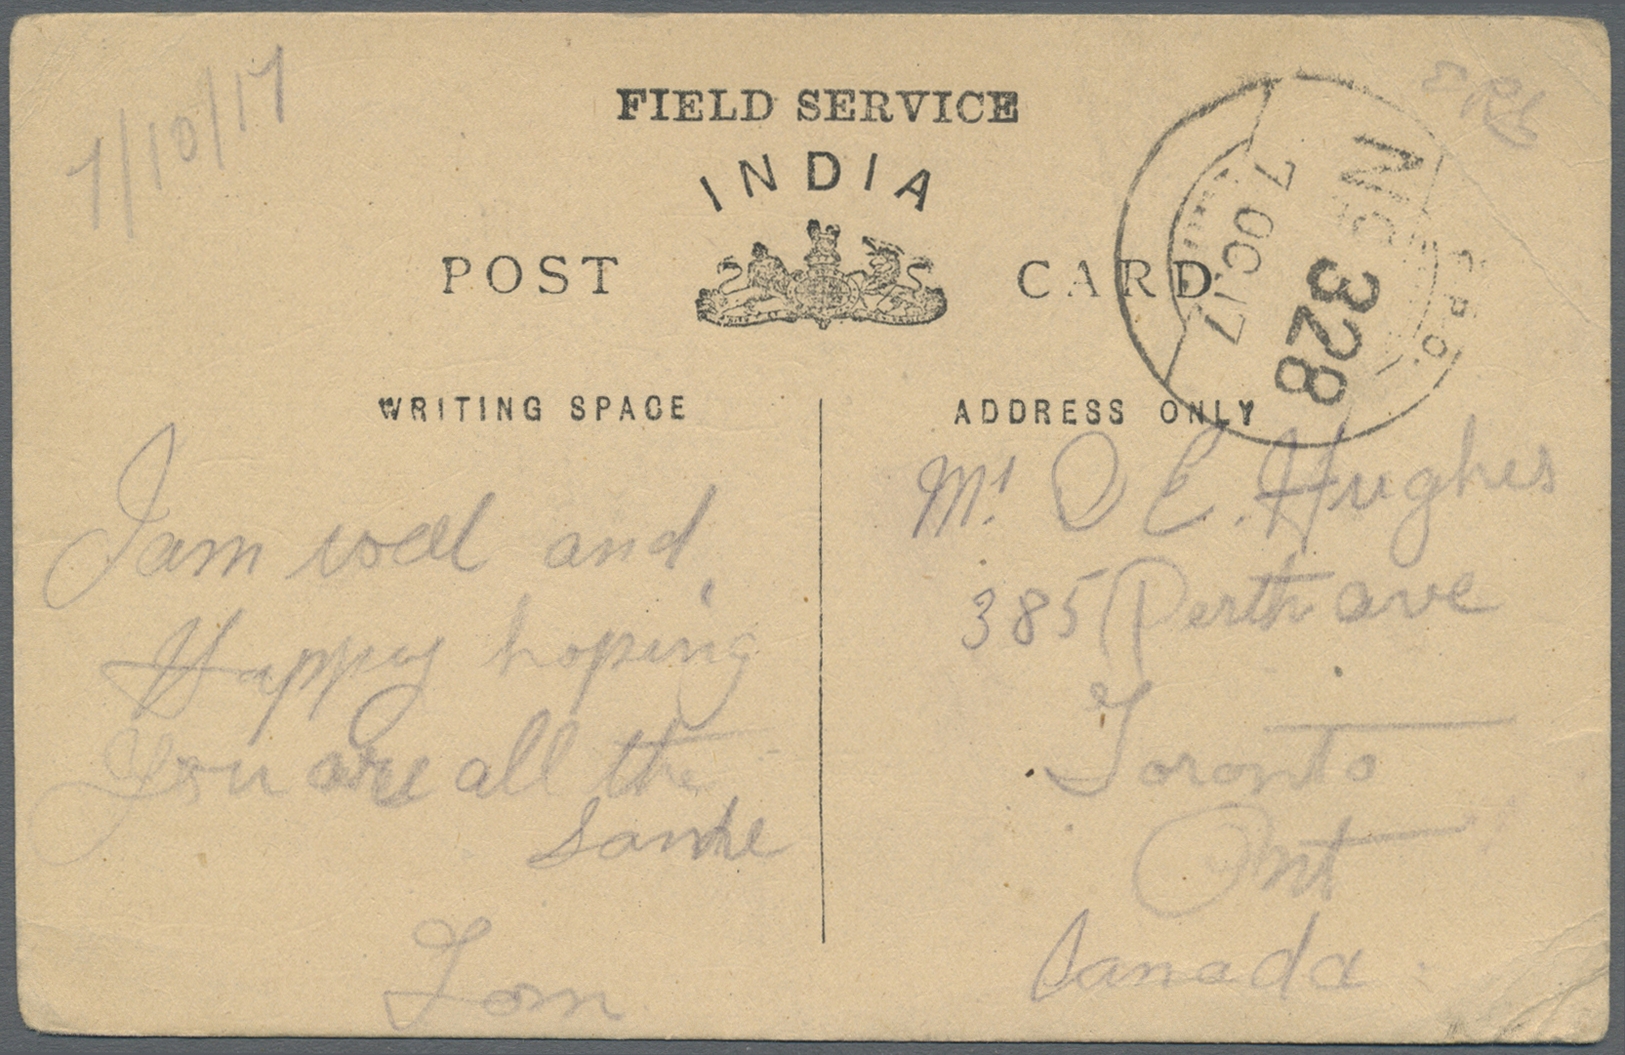 Br Indien - Feldpost: 1917 I.E.F. From IRAQ To CANADA: Indian Field Service Card Used From F.P.O. 328 (Samarra; 7th Bde. - Military Service Stamp